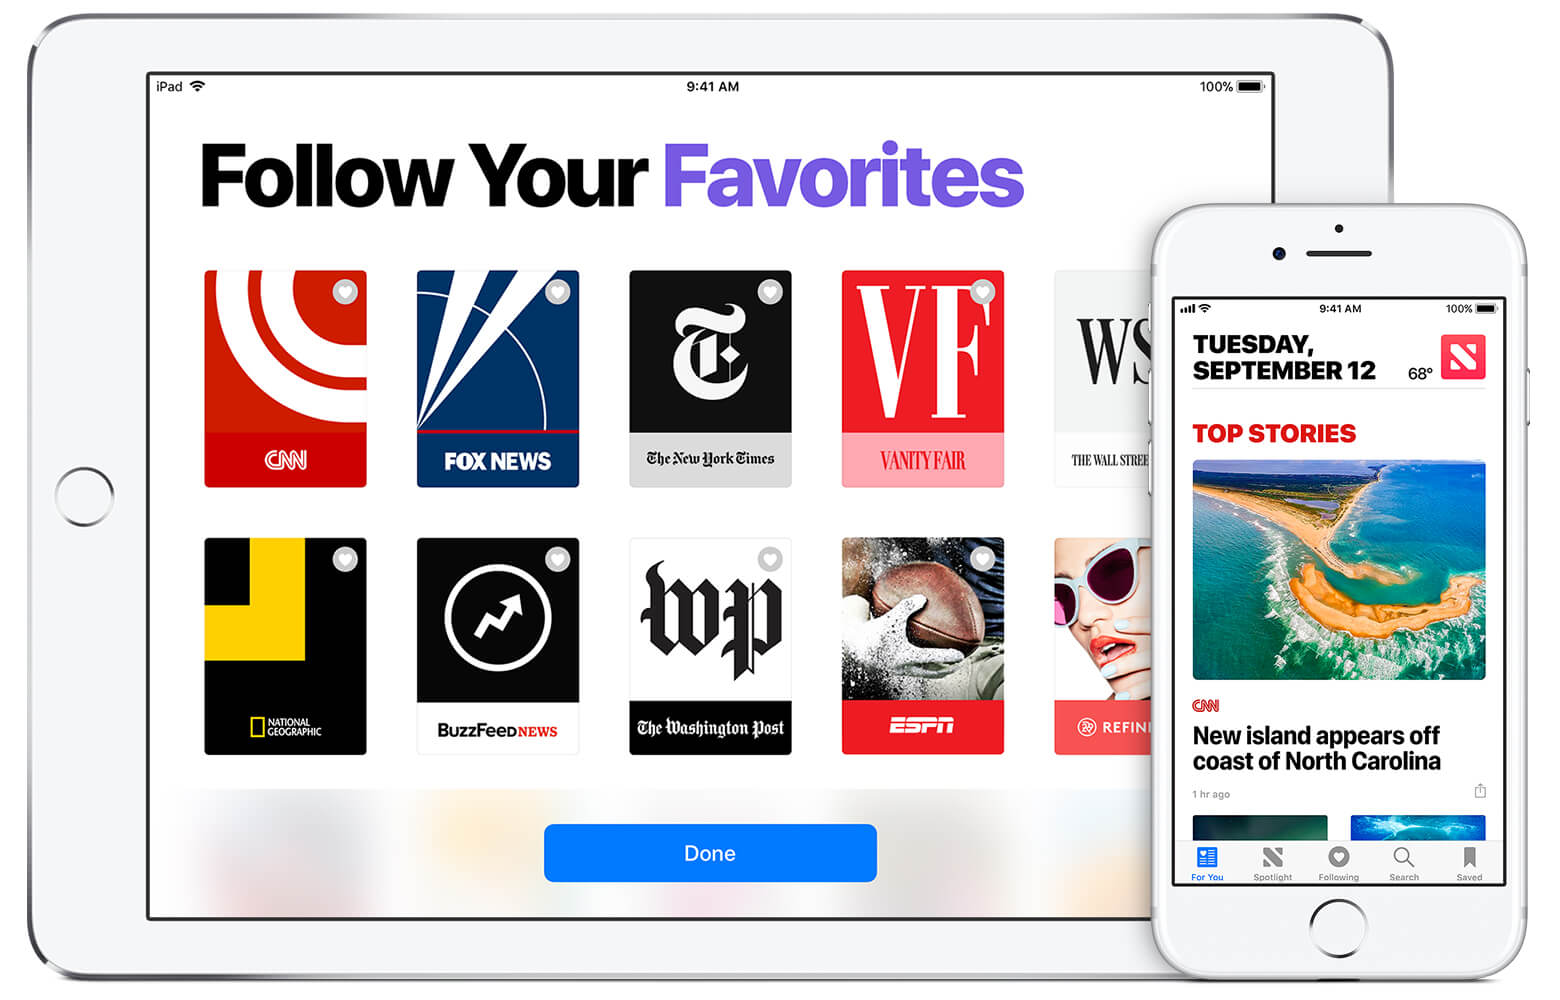 Apple is reportedly planning to launch their own news subscription service within the year